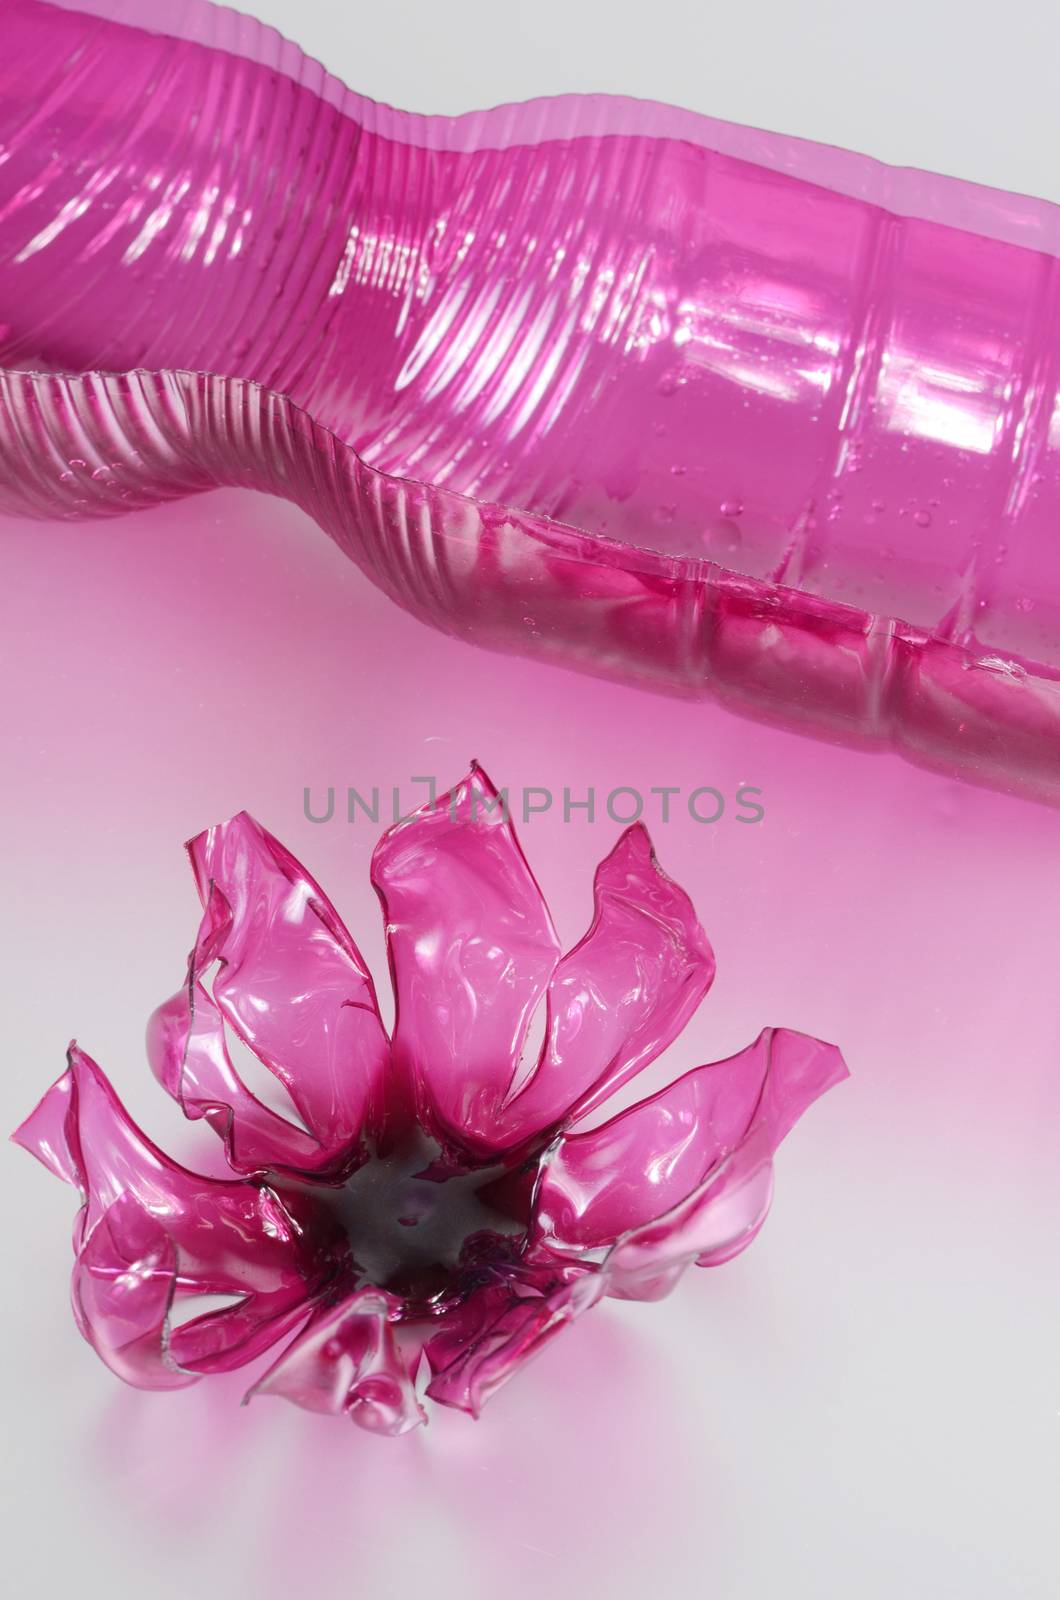 flower made of plastic bottle by sarkao